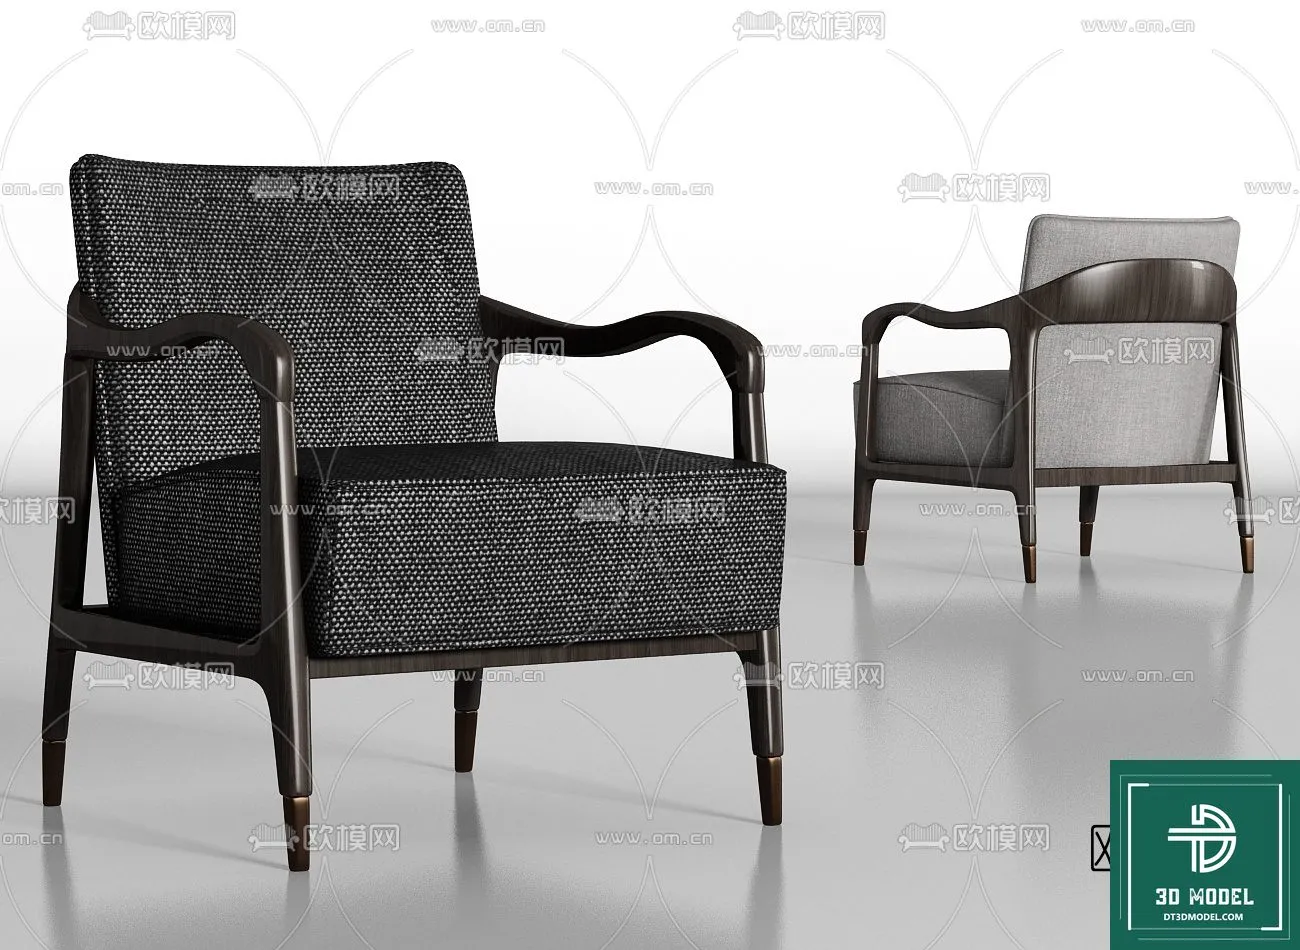 INDOCHINE STYLE – 3D MODELS – 310